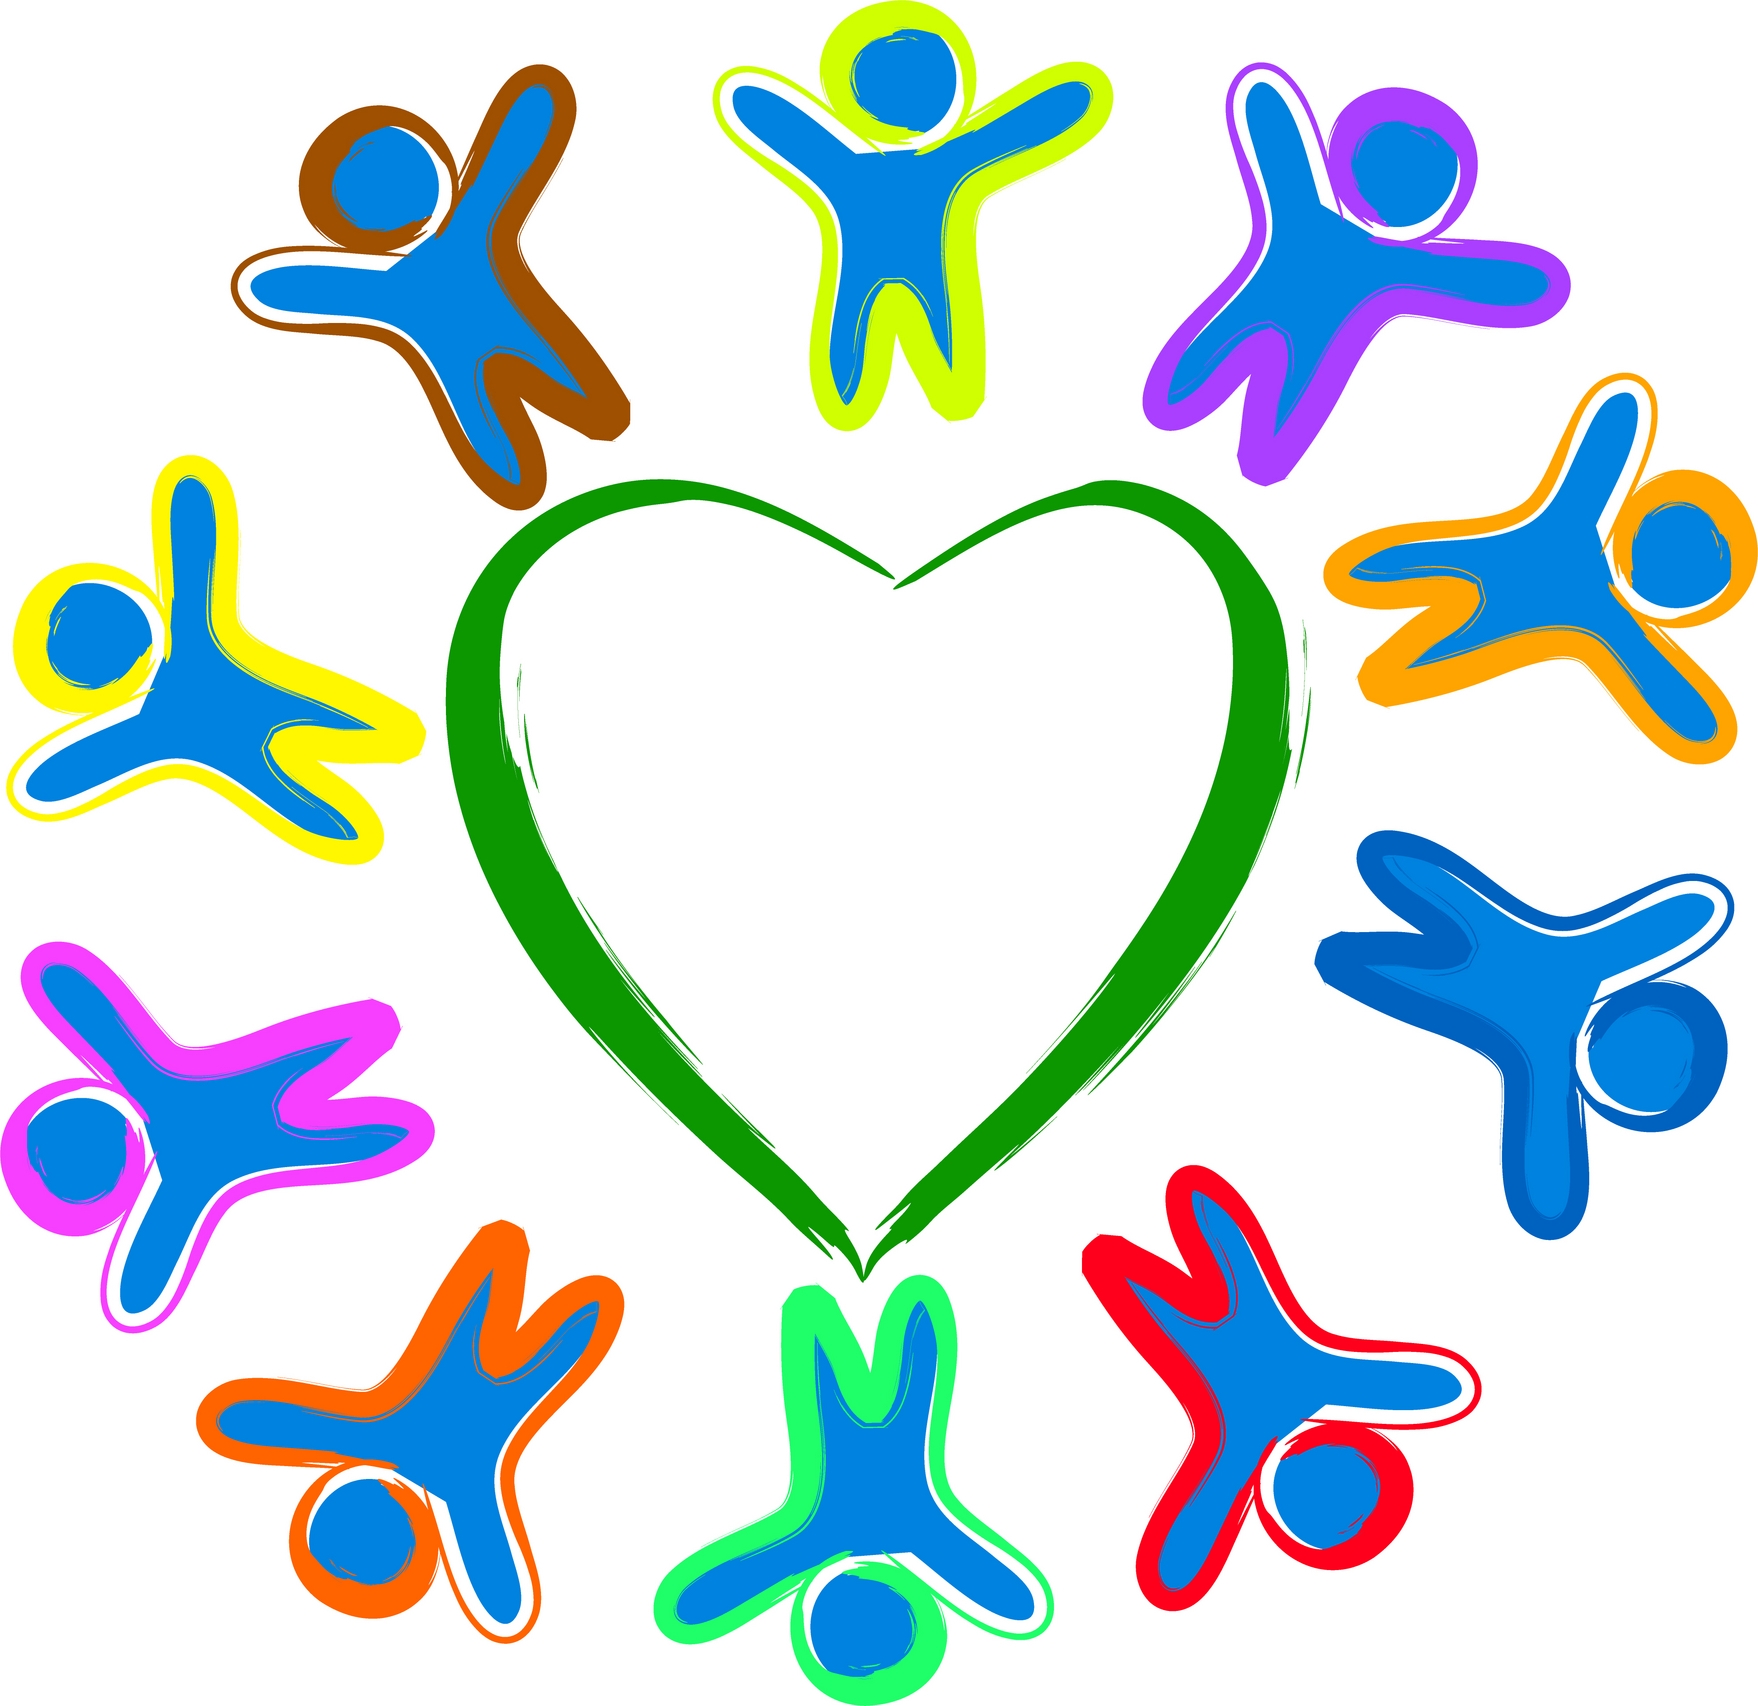 Clipart of people helping others